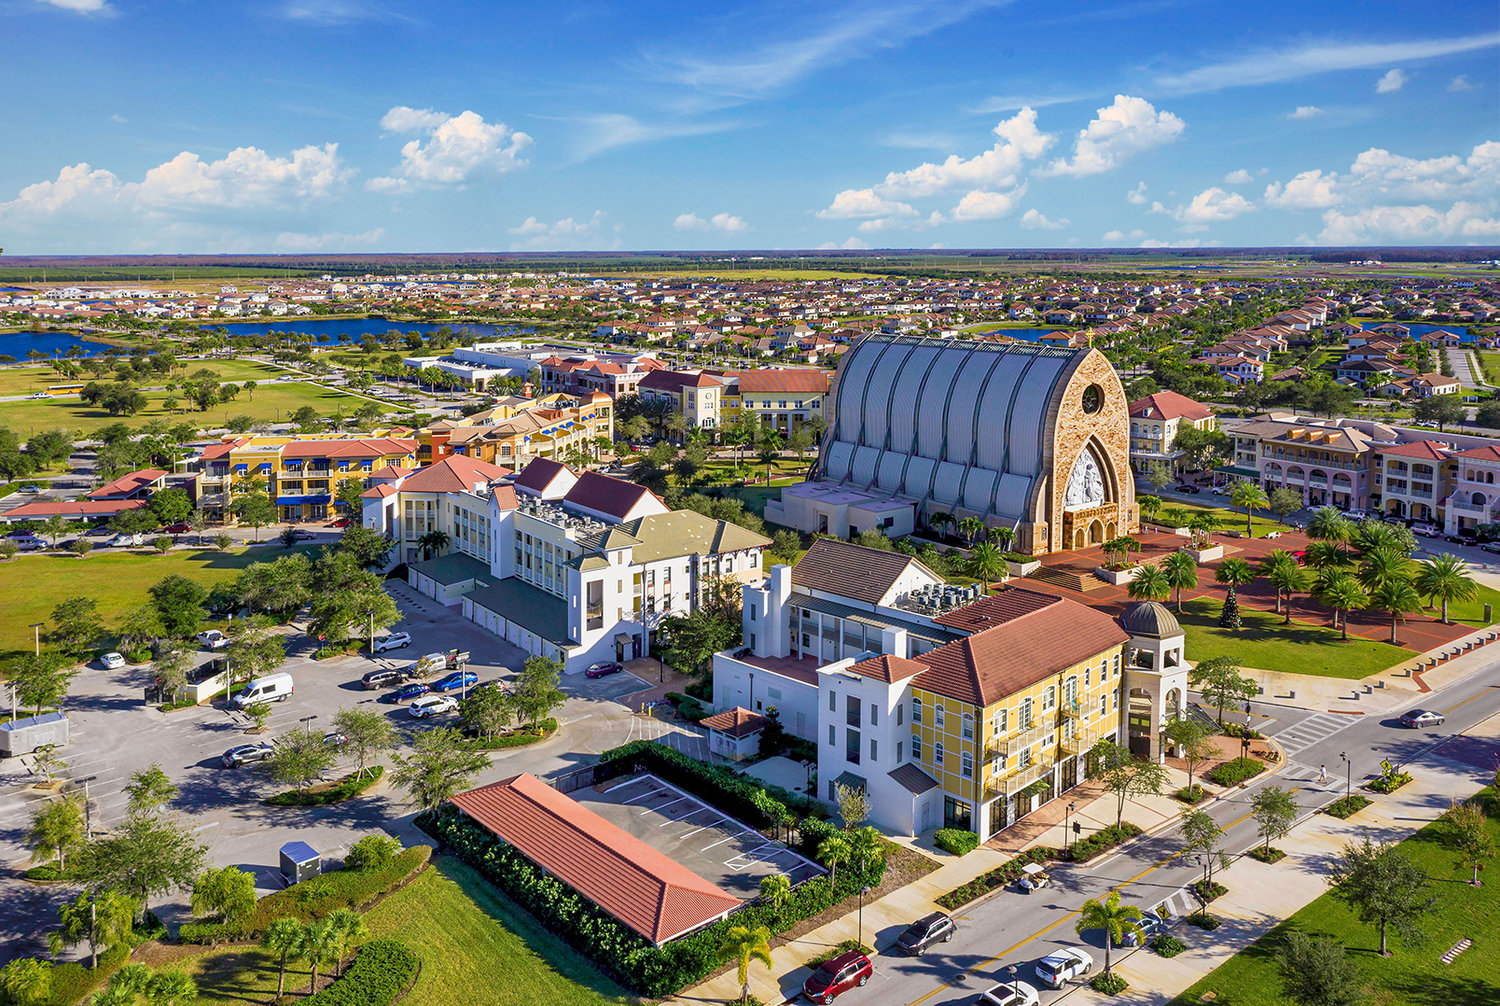 Ave Maria being ranked as one of the Top 25 Master-Planned Communities in the nation.